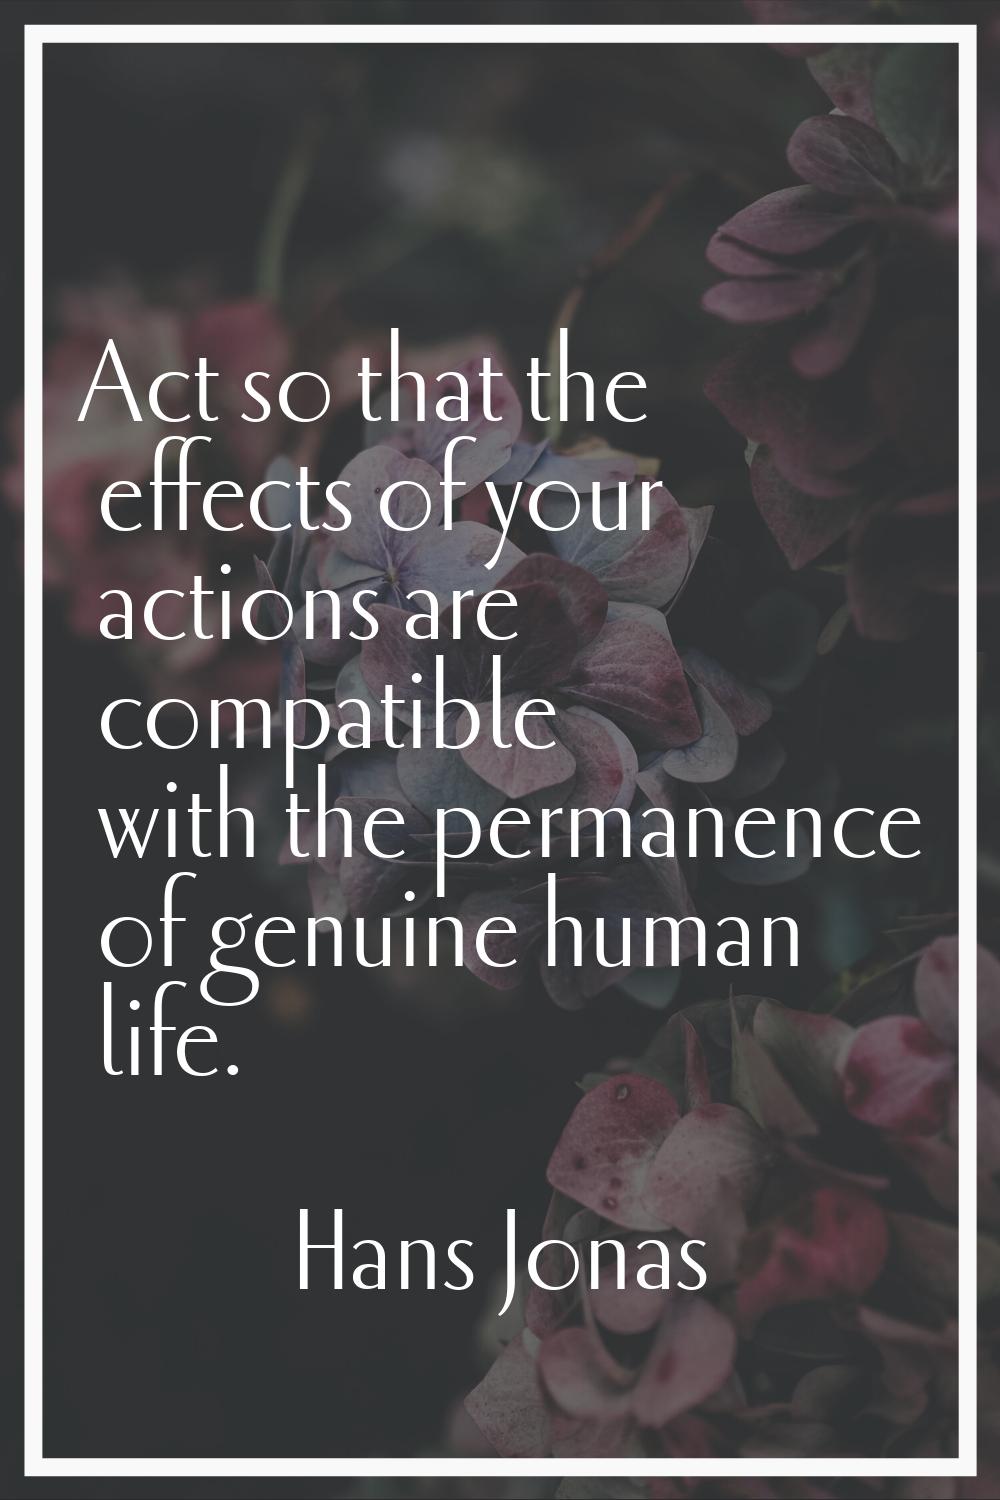 Act so that the effects of your actions are compatible with the permanence of genuine human life.